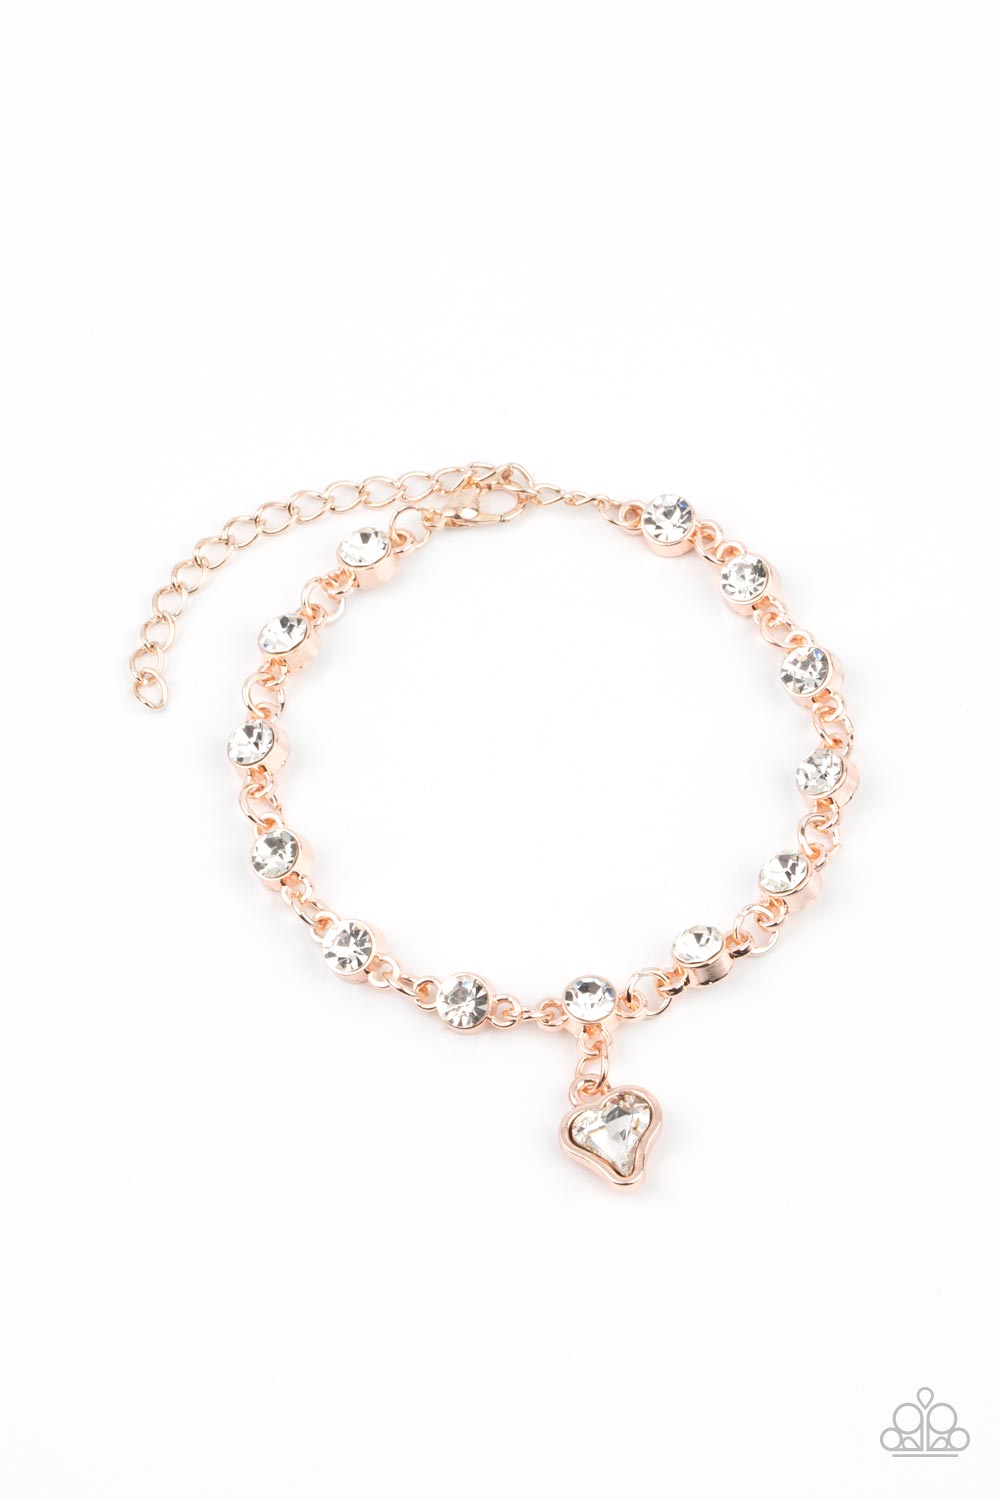 Sweet Sixteen Rose Gold and White Rhinestone Heart Charm Bracelet - Paparazzi Accessories- lightbox - CarasShop.com - $5 Jewelry by Cara Jewels